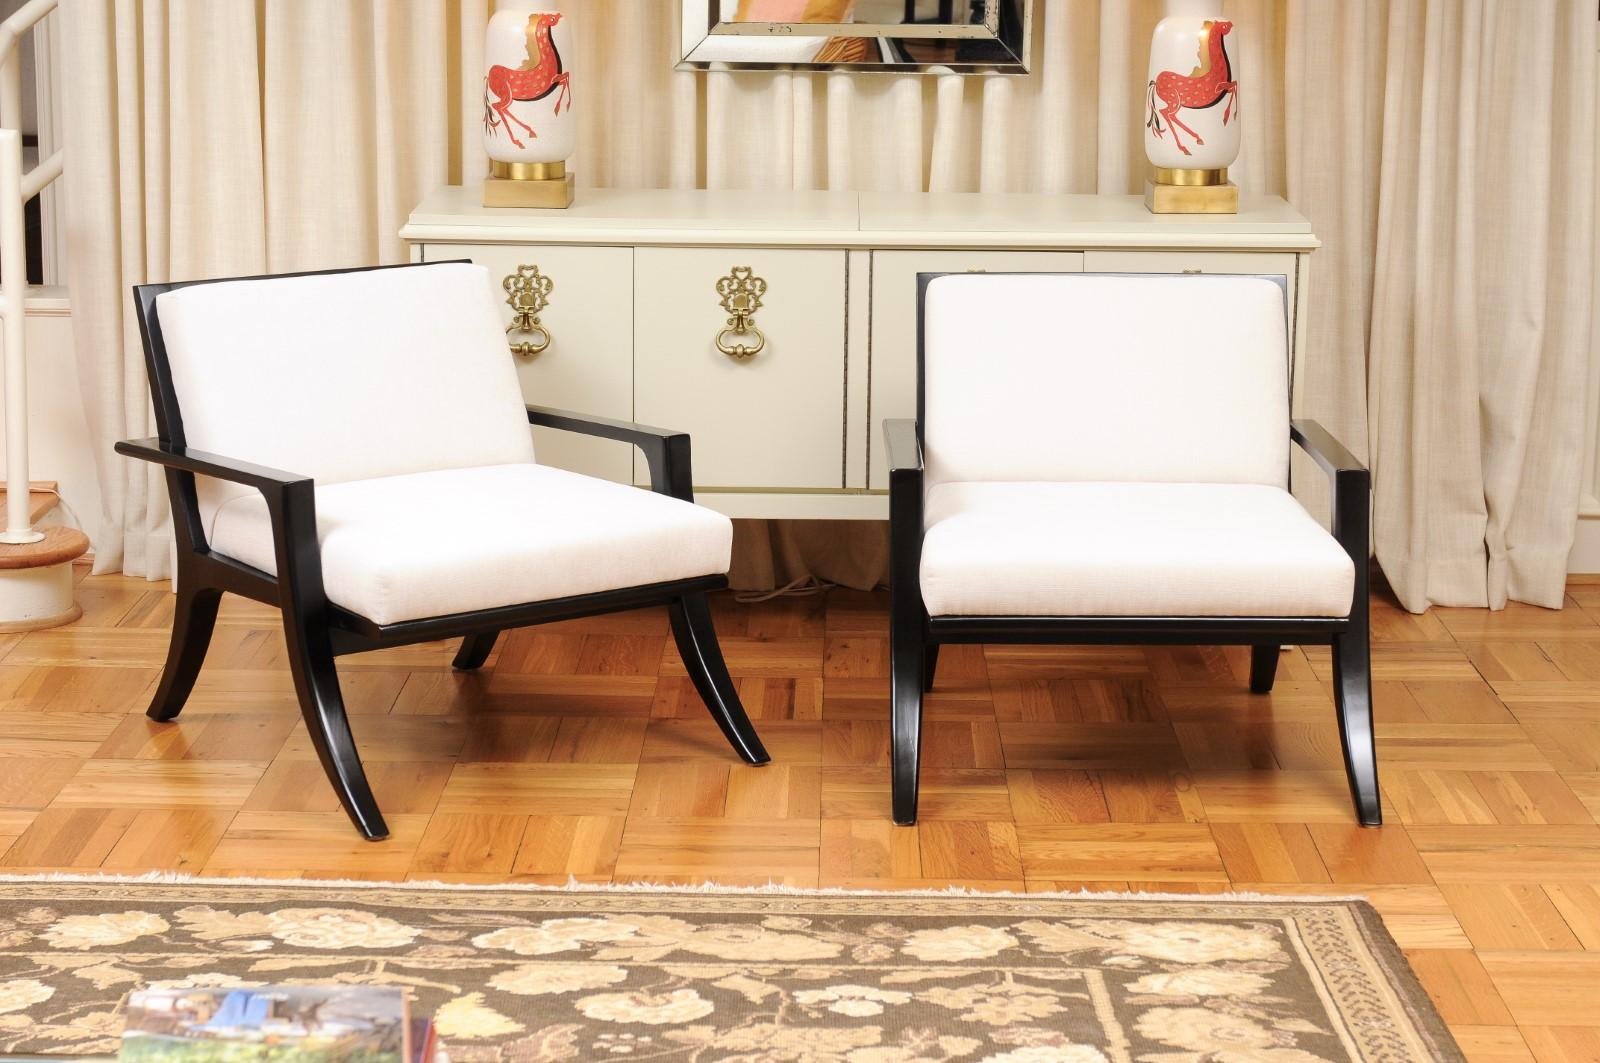 These magnificent lounge chairs are shipped as professionally photographed and described in the listing narrative: Meticulously professionally restored, expertly upholstered and installation ready. There are two (2) identical pairs available. The